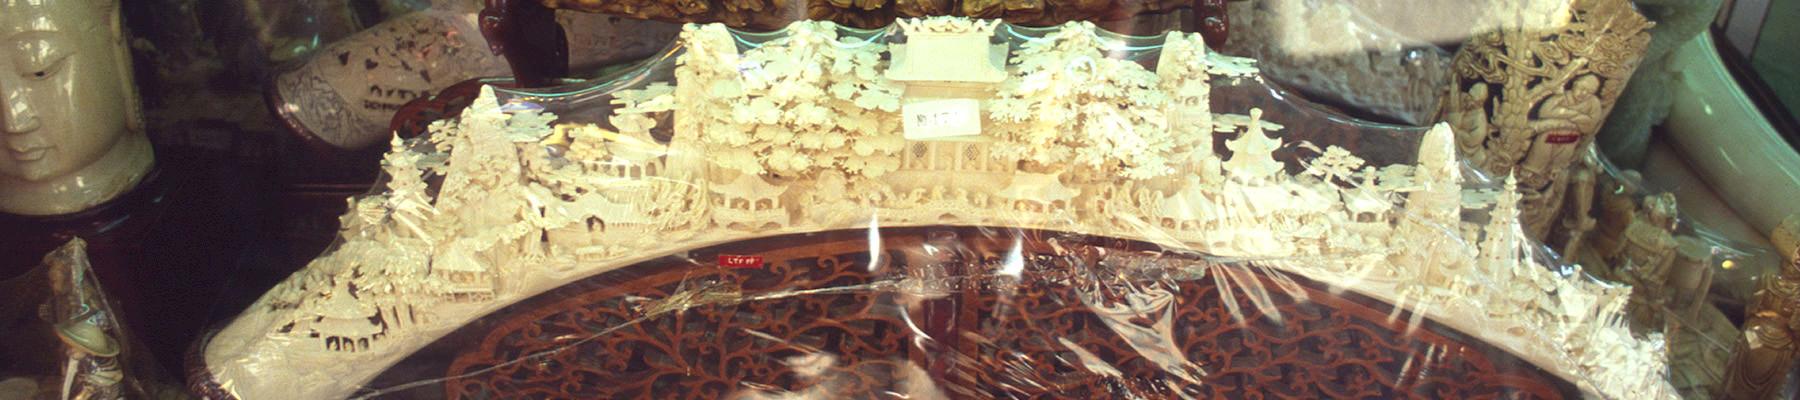 Two men were convicted in Hong Kong of illegally selling ivory after forensic evidence proved they were trading recently sourced ivory chopstick. File photo of ivory on sale in Hong Kong © TRAFFIC